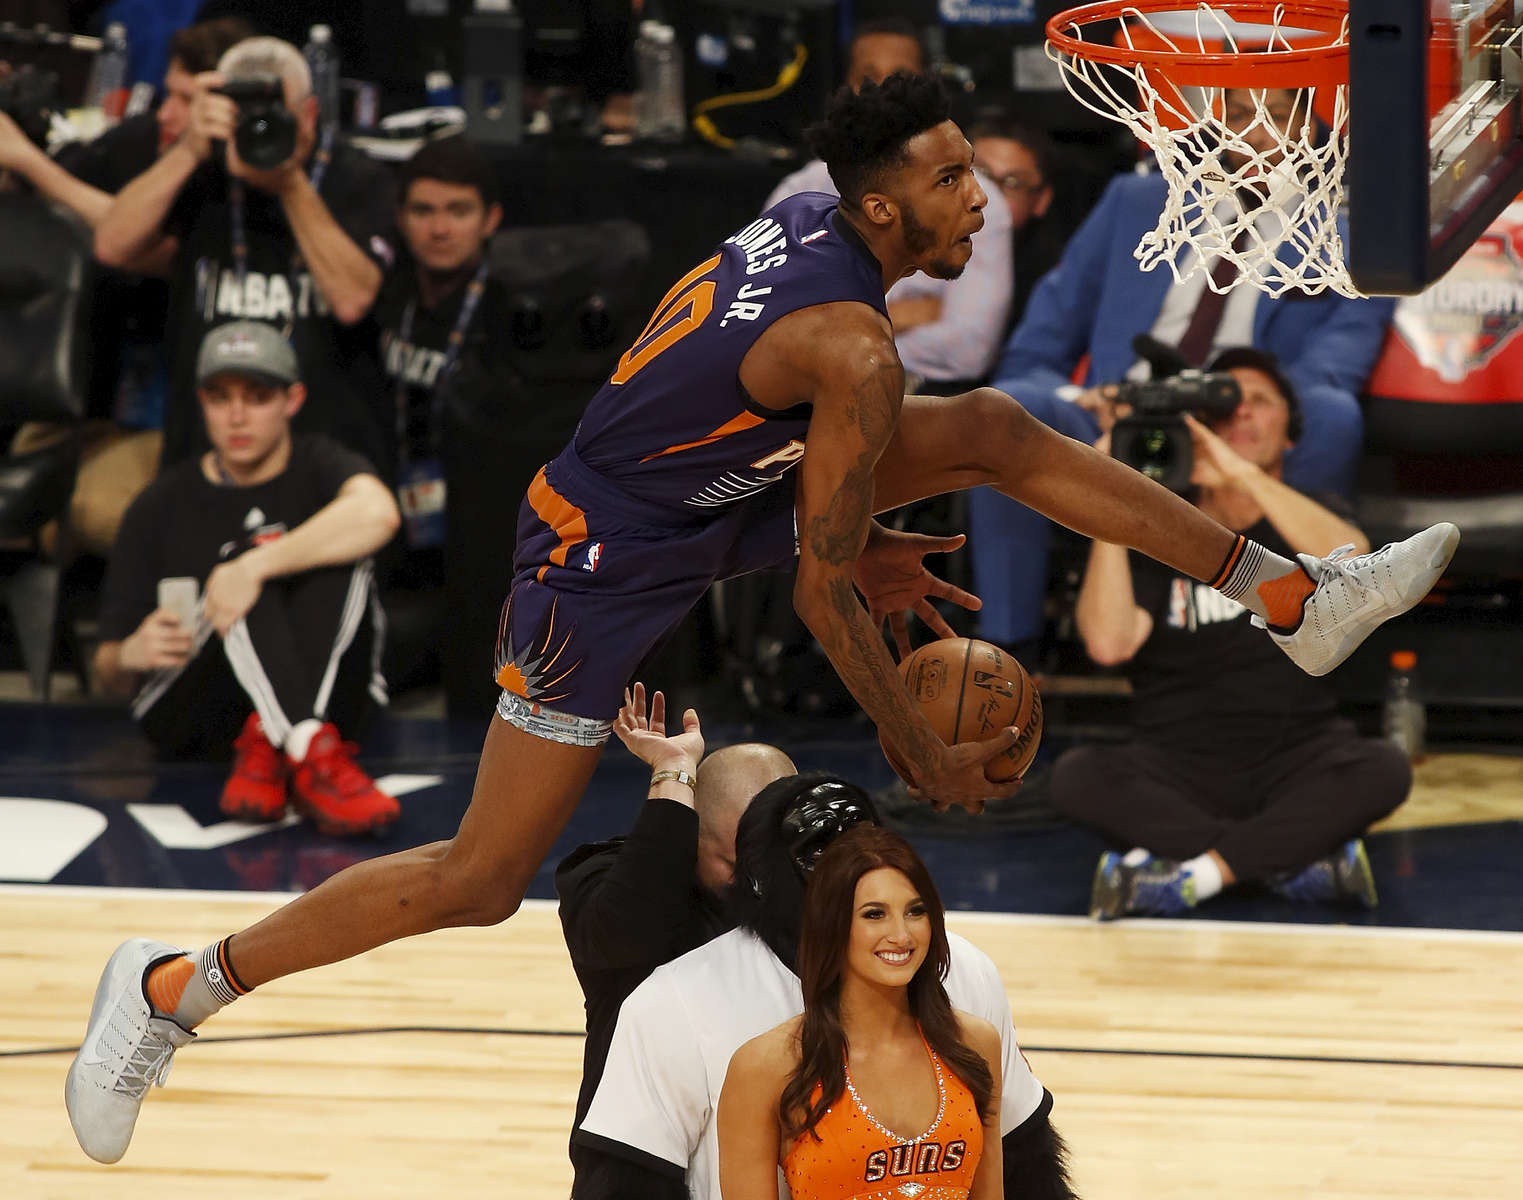 Phoenix Suns forward Derrick Jones Jr. (10) leaps over three people during the slam-dunk contest as part of the NBA All-Star Saturday Night events in New Orleans, Saturday, Feb. 18, 2017. (AP Photo/Max Becherer)